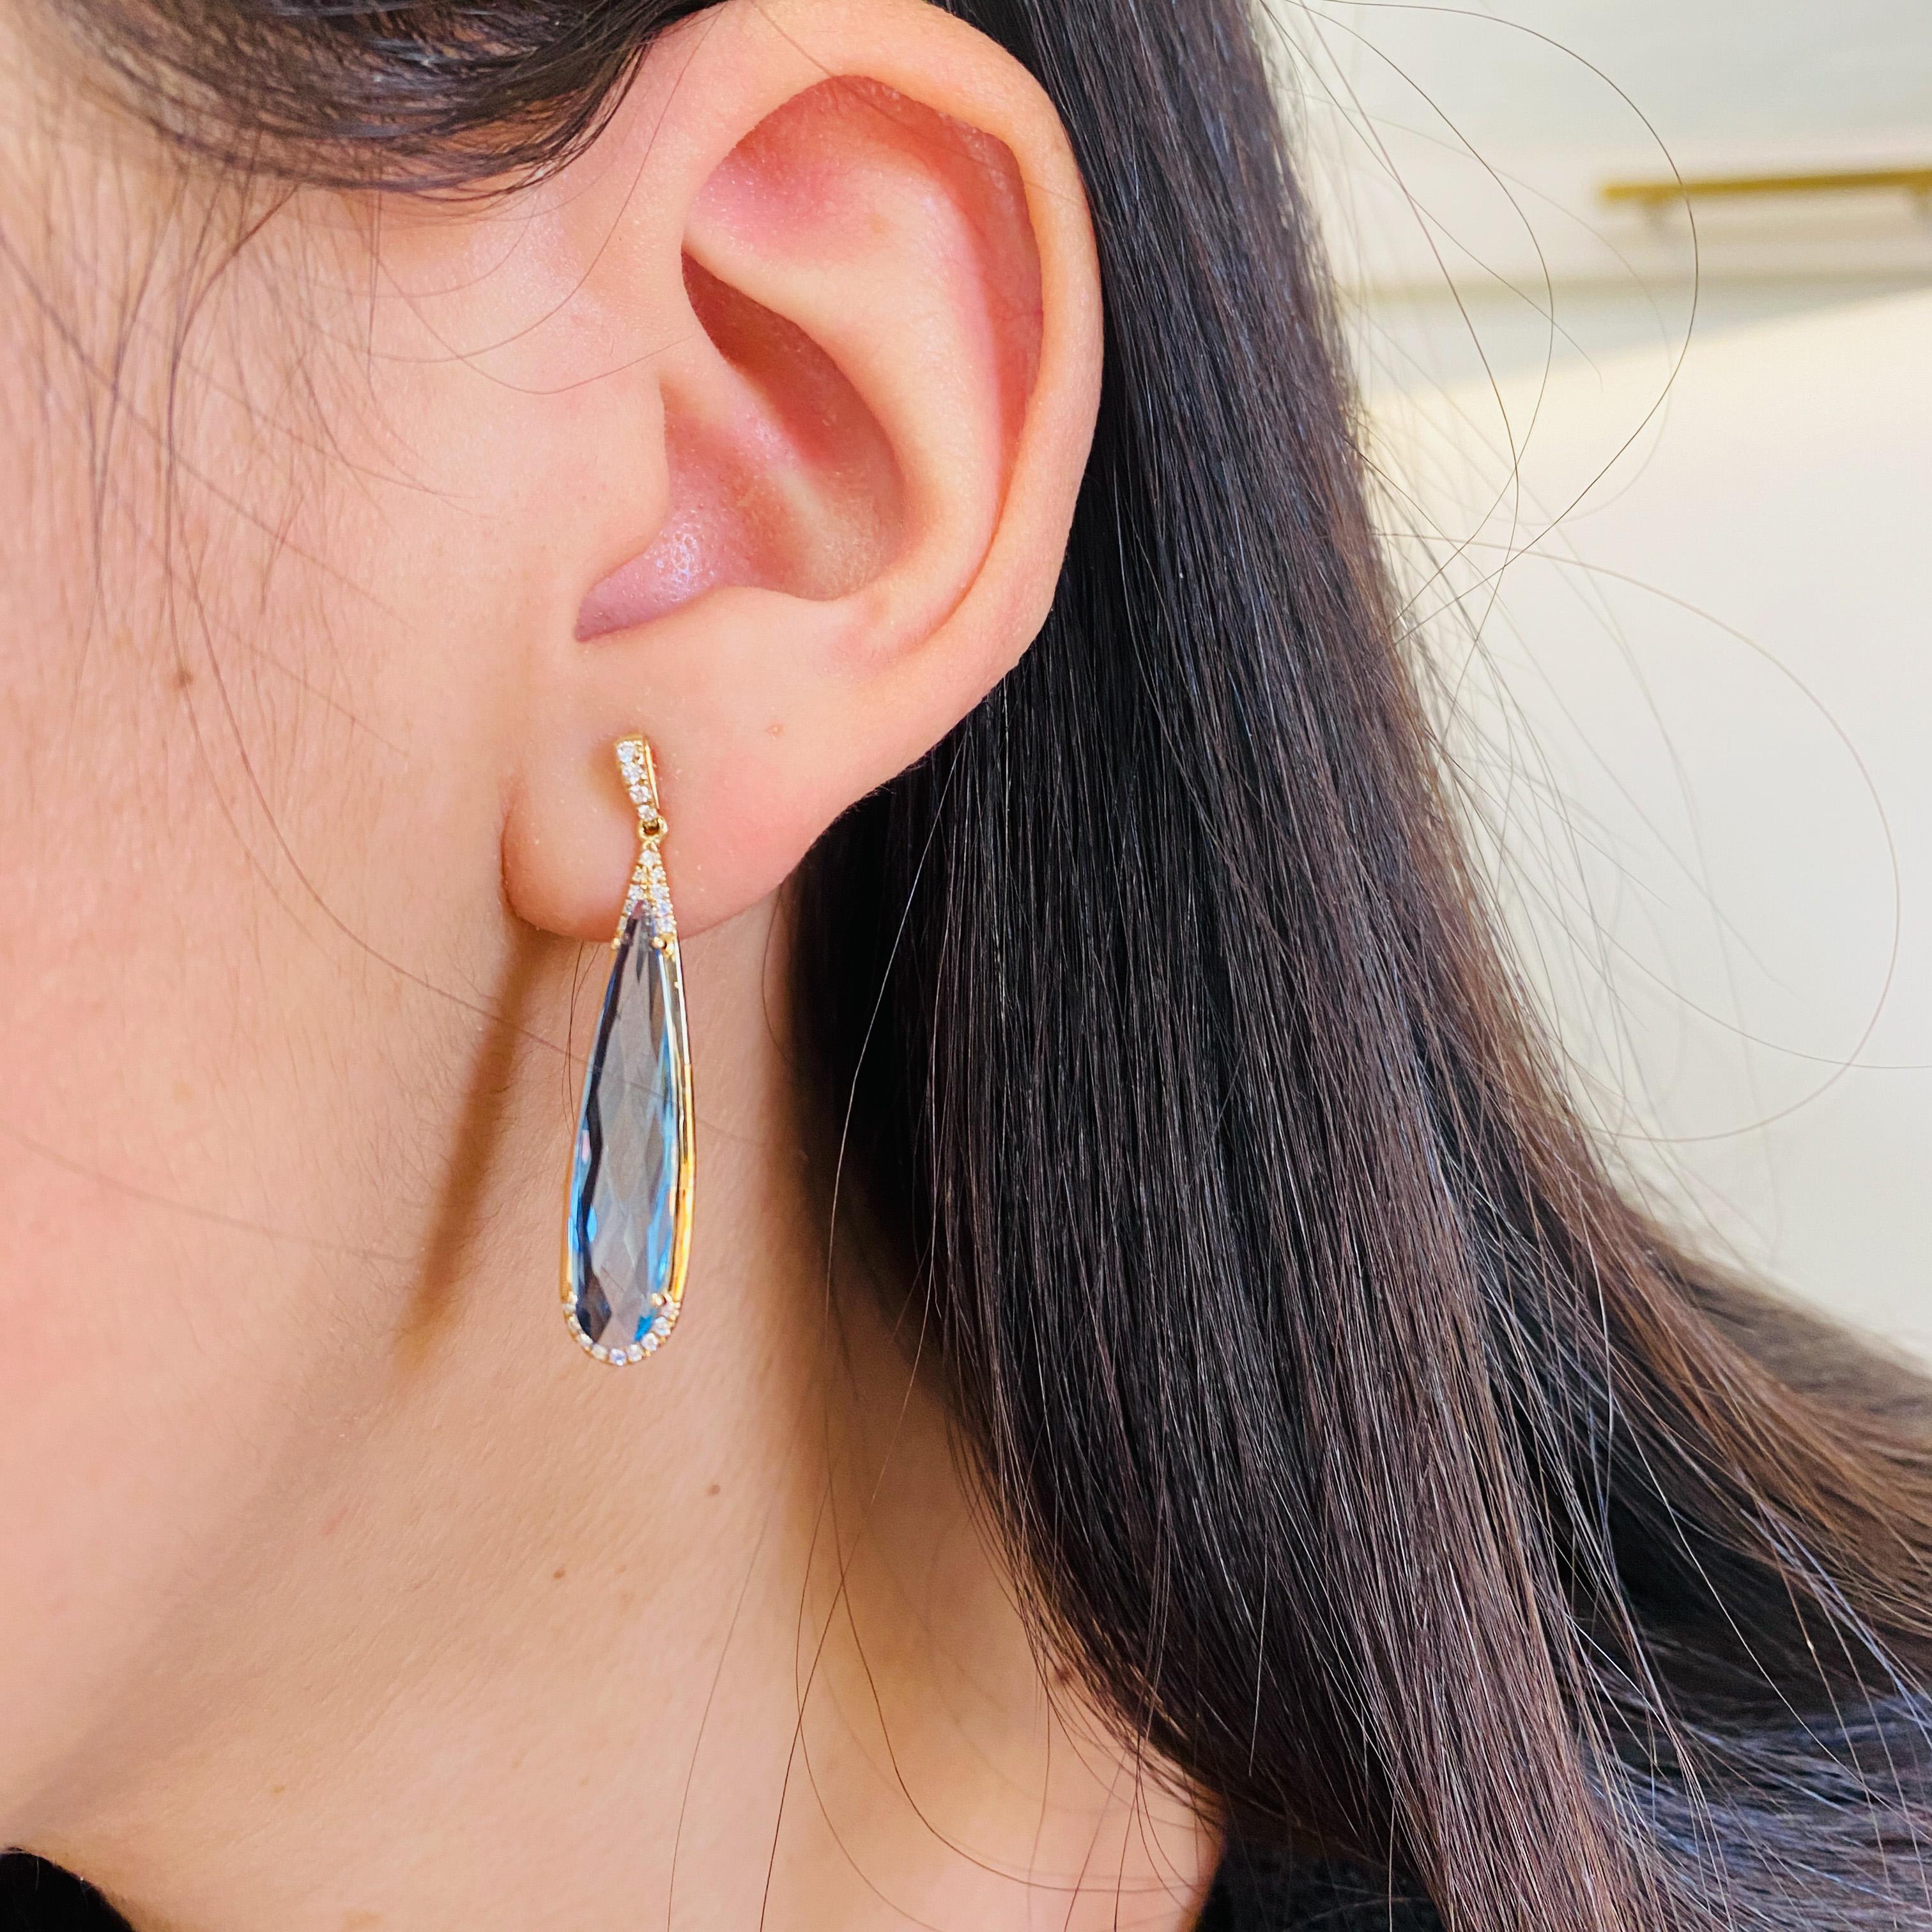 The perfect earrings for your something blue! Whether you need wedding earrings or just a striking pair of earrings to wear whenever you want your inner sparkle to shine outside too, these earrings are perfect! The facets on the briolette blue topaz